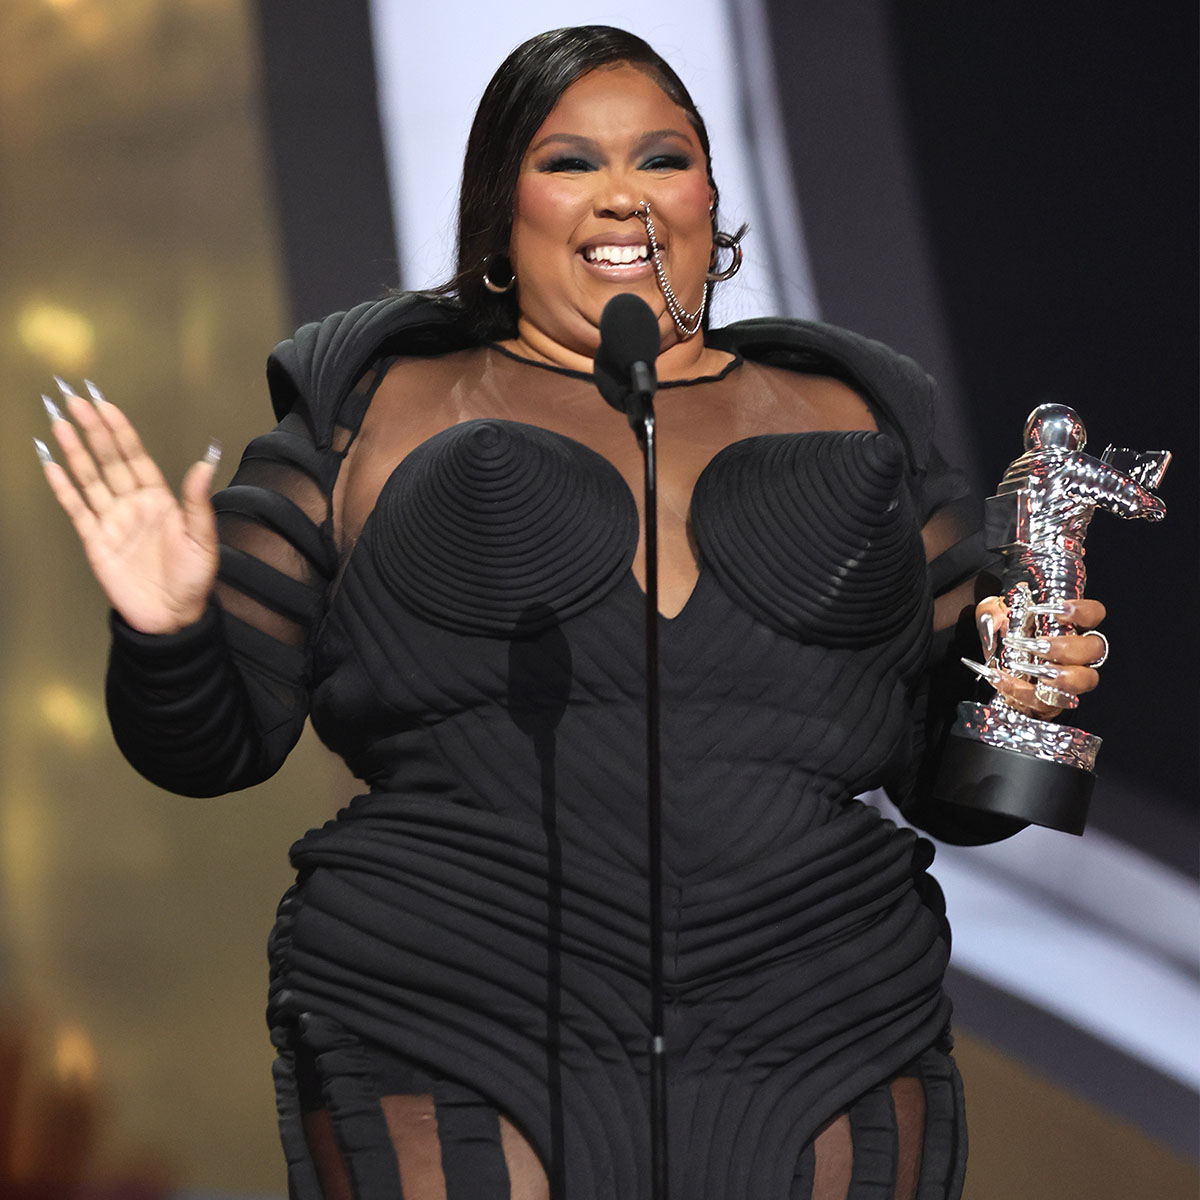 Lizzo Addresses Her Haters While Accepting Award at 2022 MTV VMAs